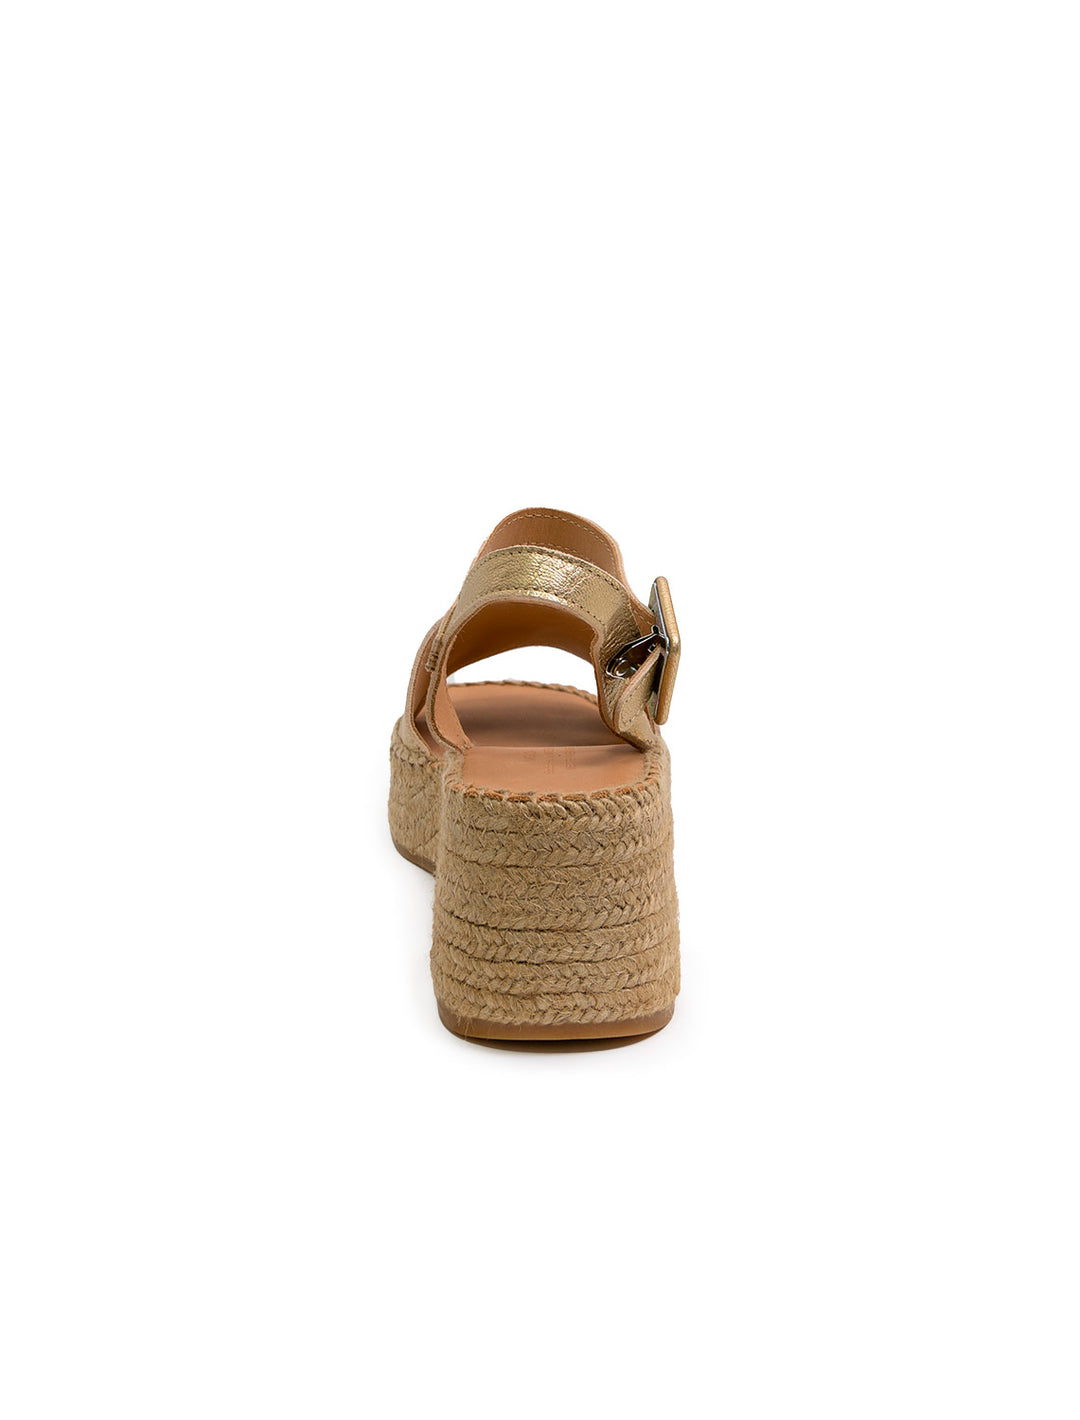 Back view of Naguisa's rall espadrille wedge in metallic gold.